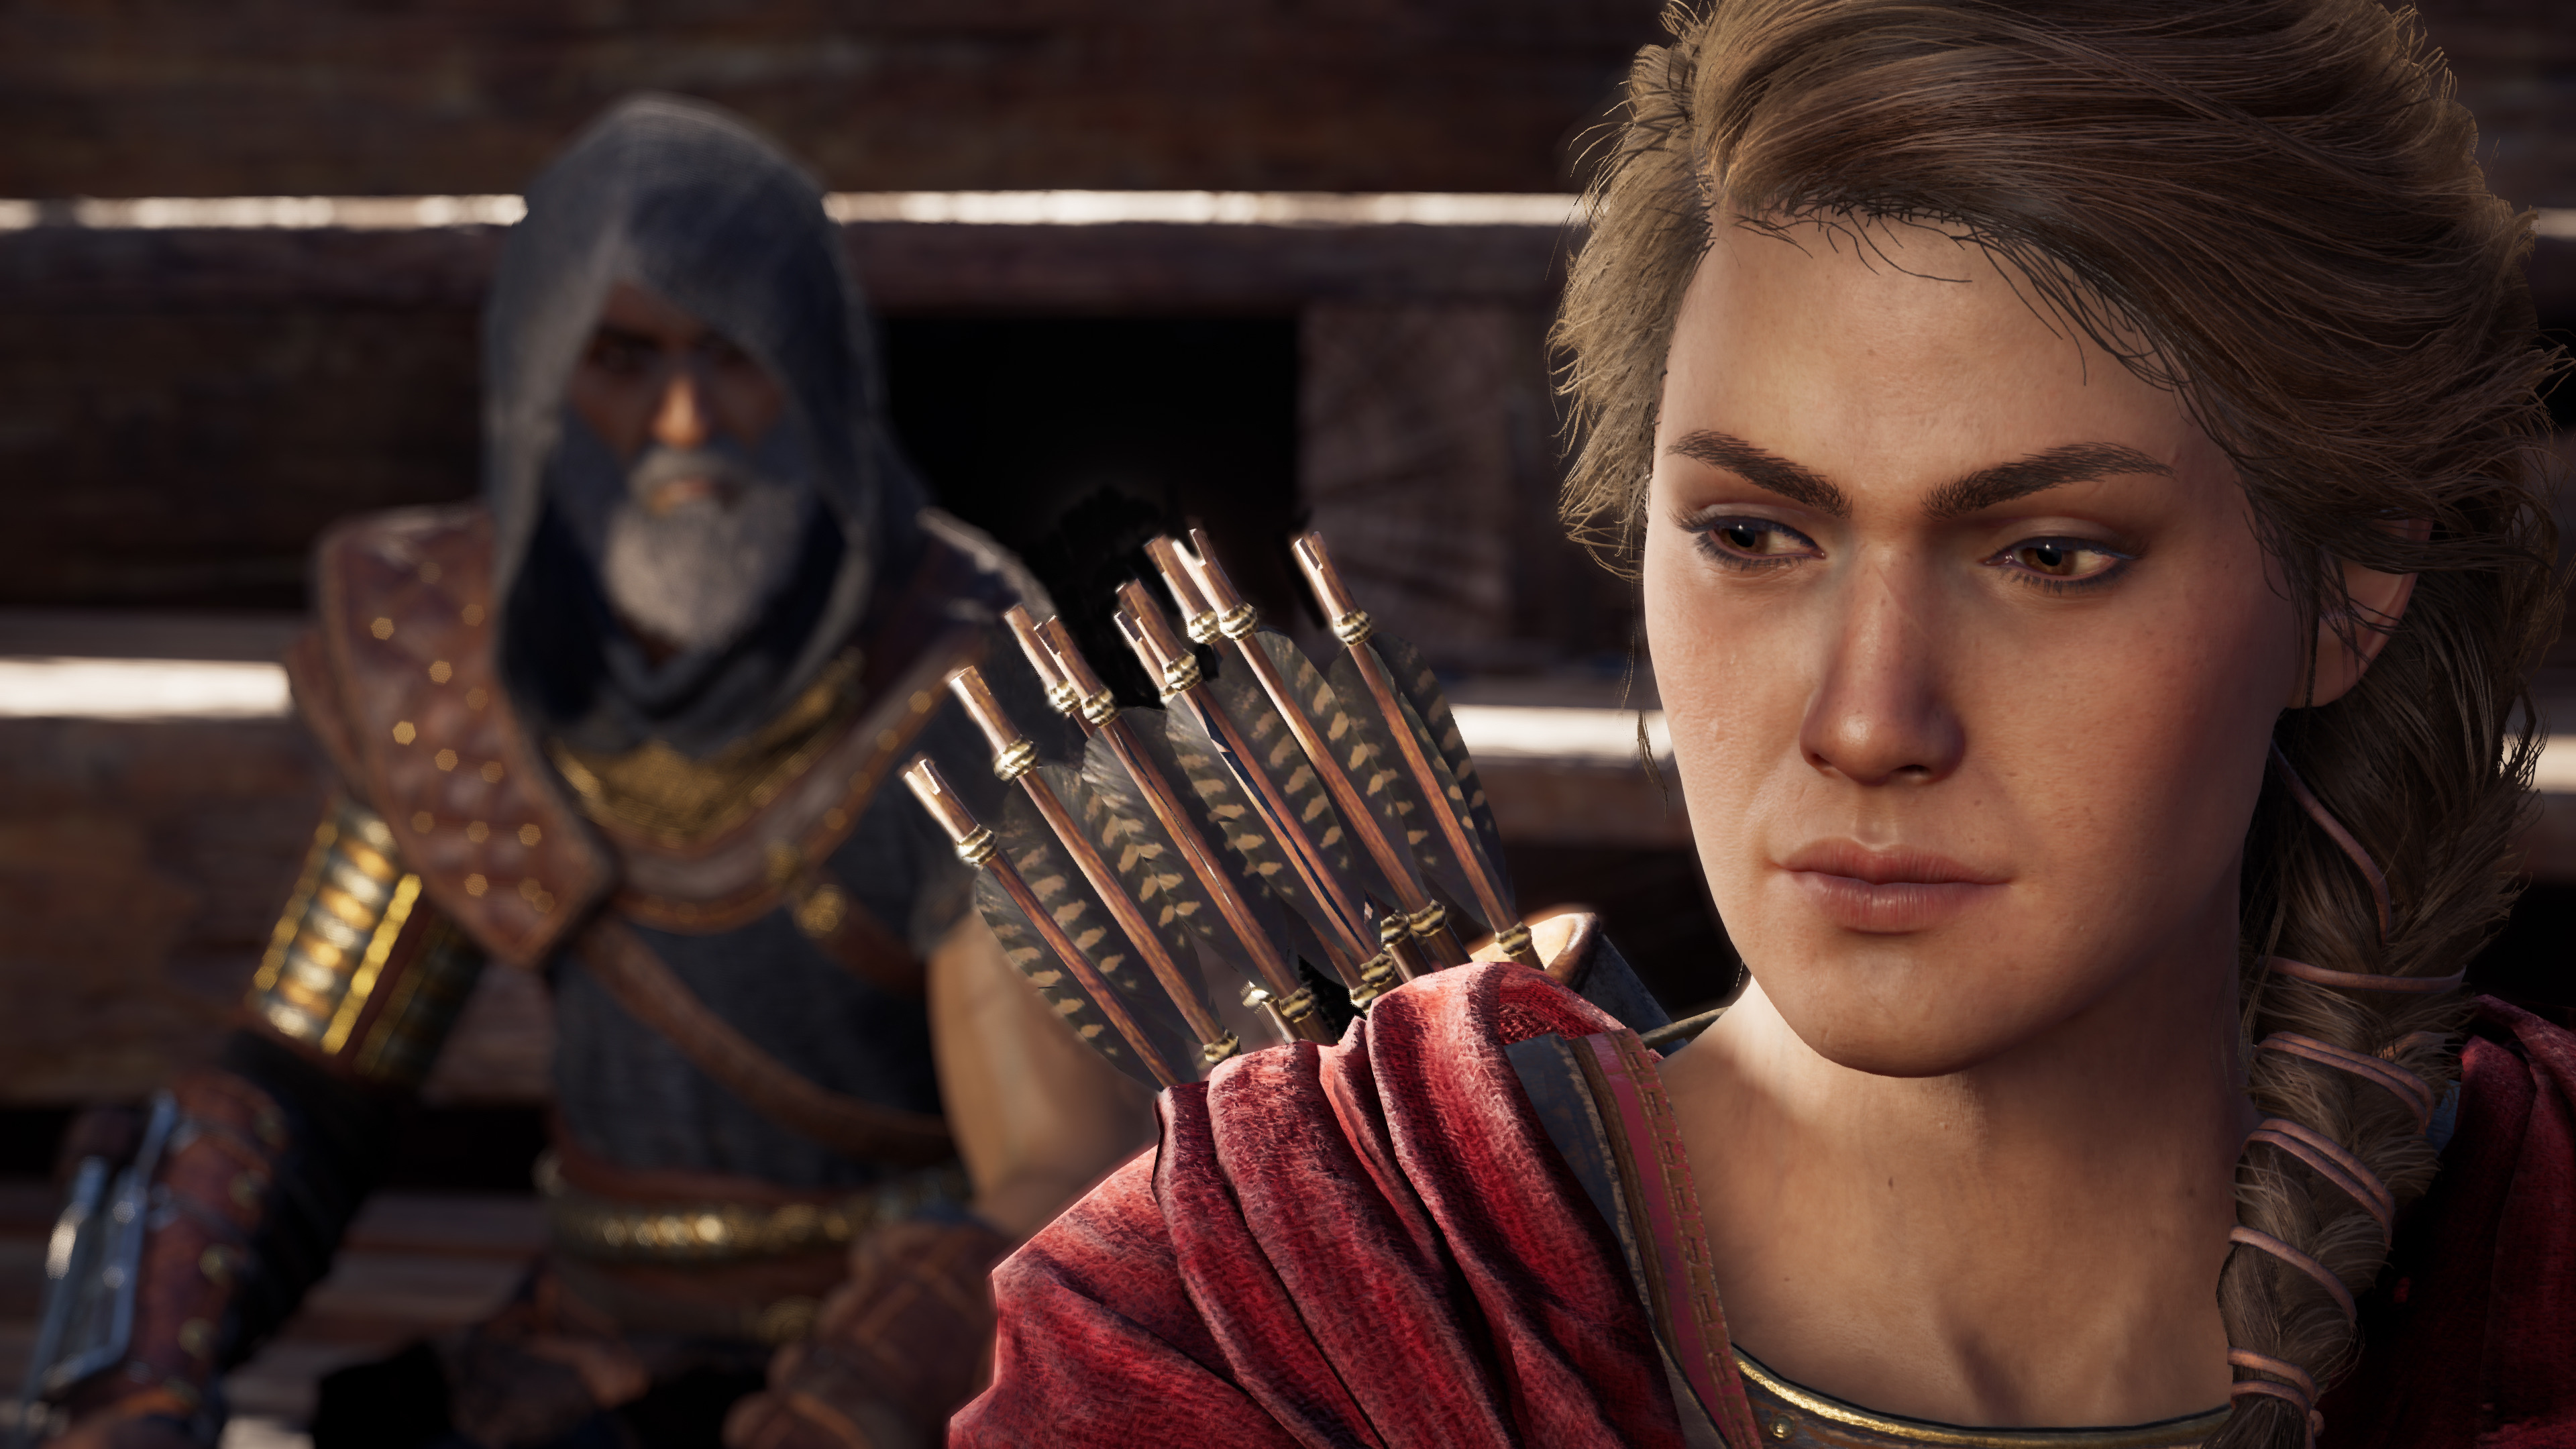 993928 4K, Alexios, Greek mythology, Assassins Creed Odyssey, video games,  Assassins Creed, Greece, Spartans - Rare Gallery HD Wallpapers